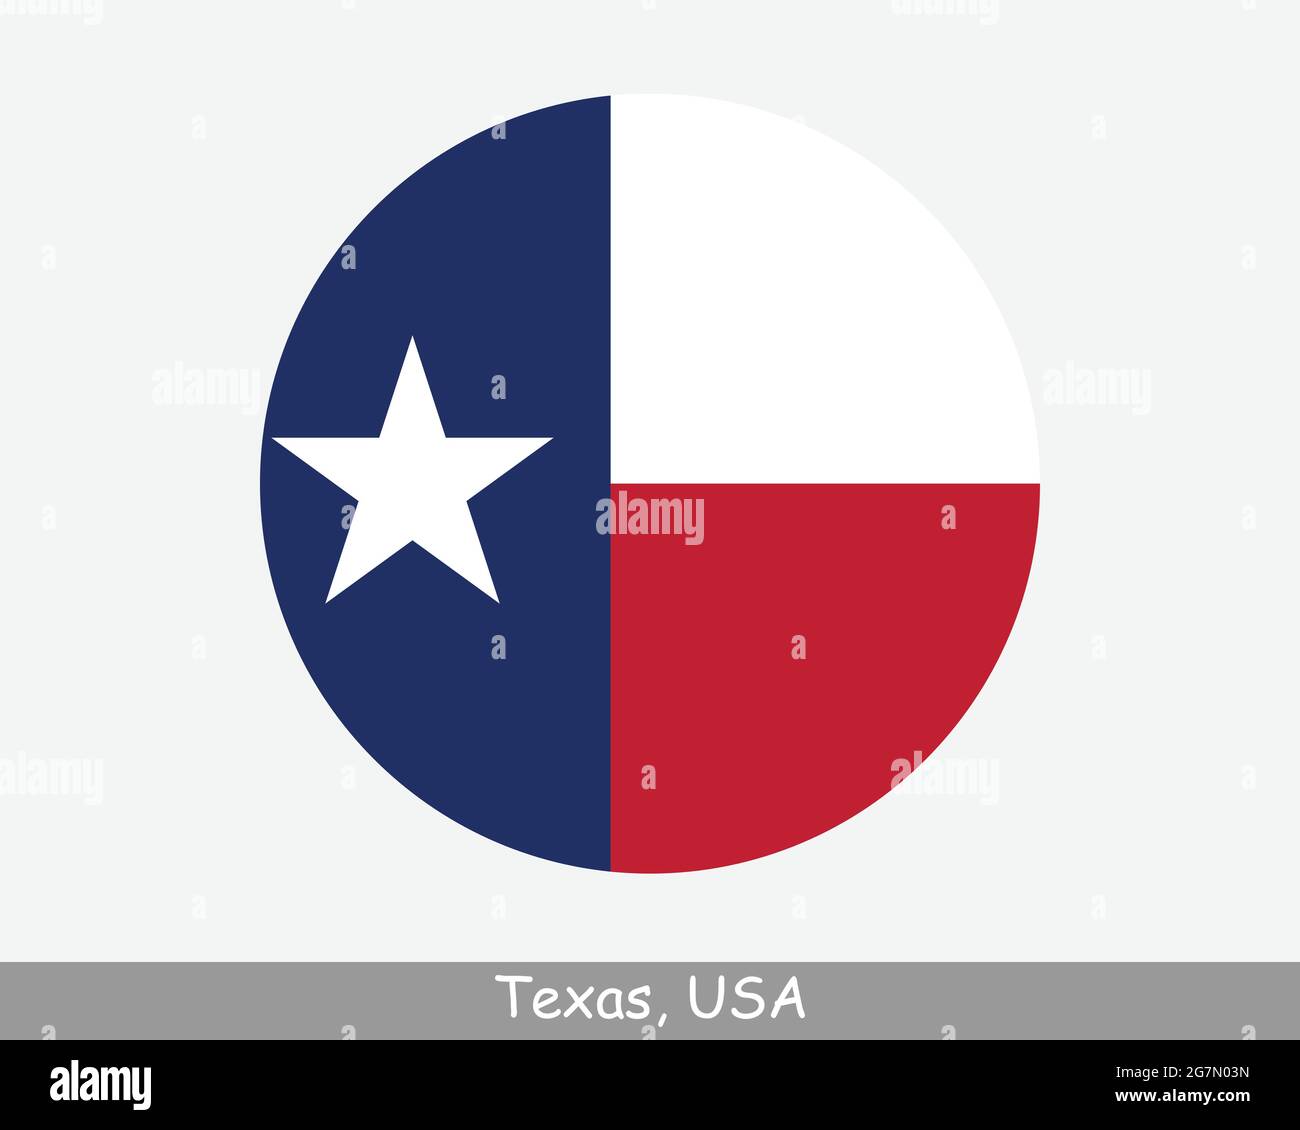 Texas Round Circle Flag. TX USA State Circular Button Banner Icon. Texas United States of America State Flag. The Lone Star State EPS Vector Stock Vector